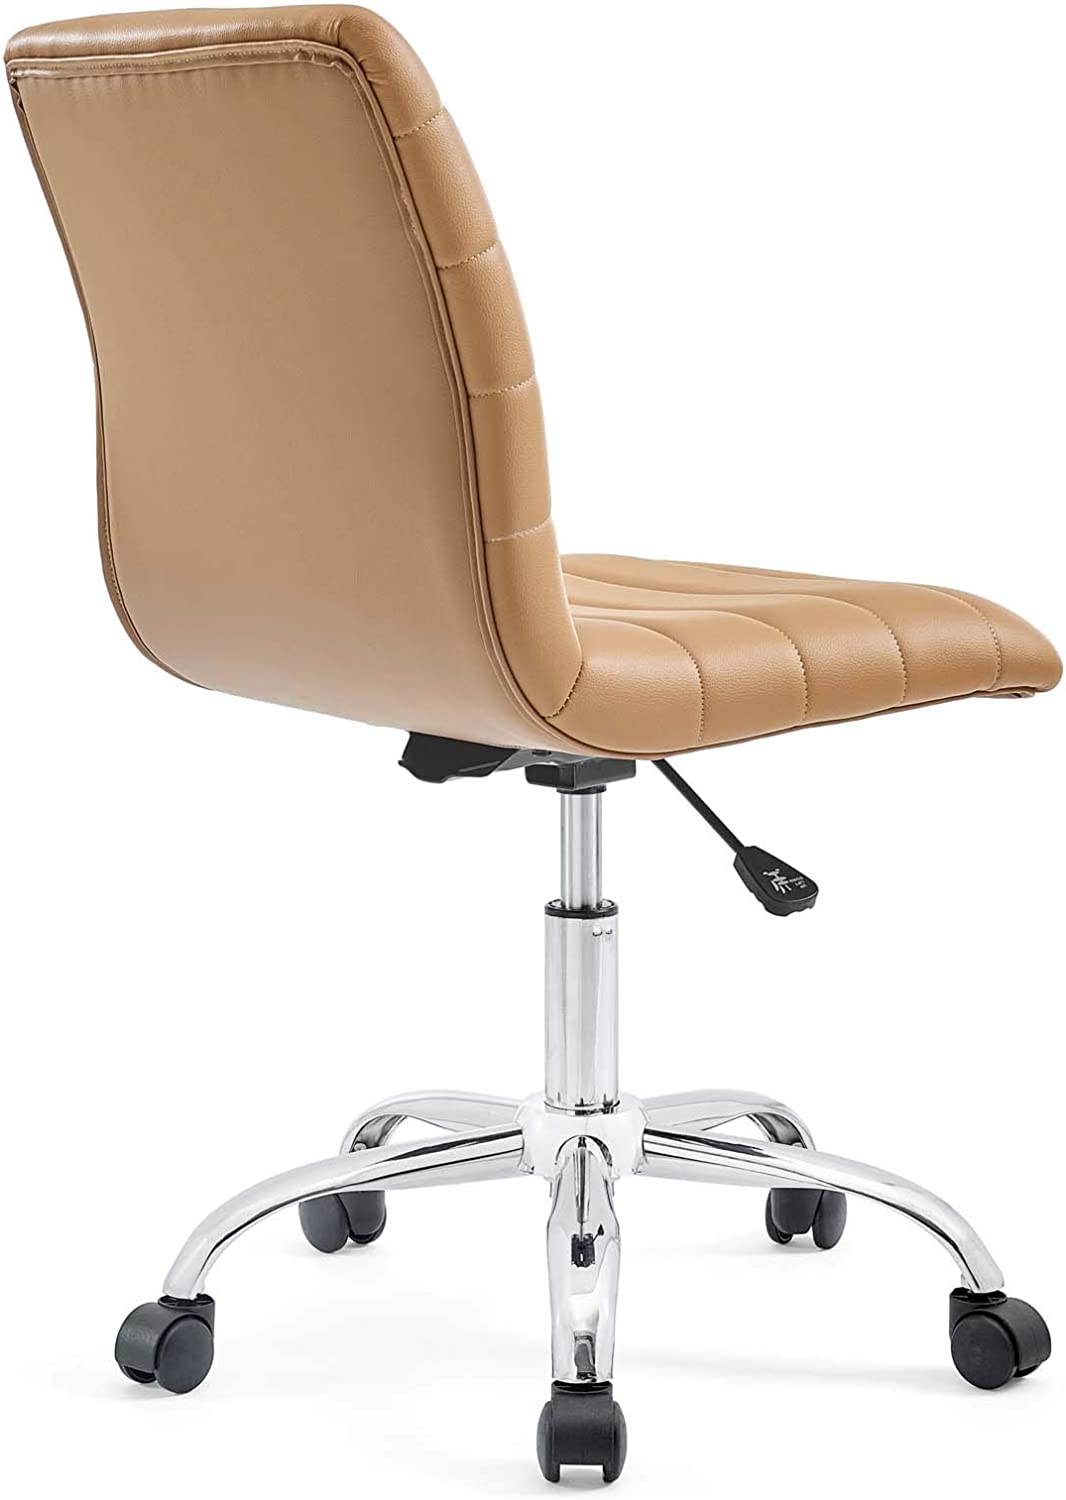 Modway Ripple Ribbed Armless Mid Back Swivel Computer Desk Office Chair In Tan